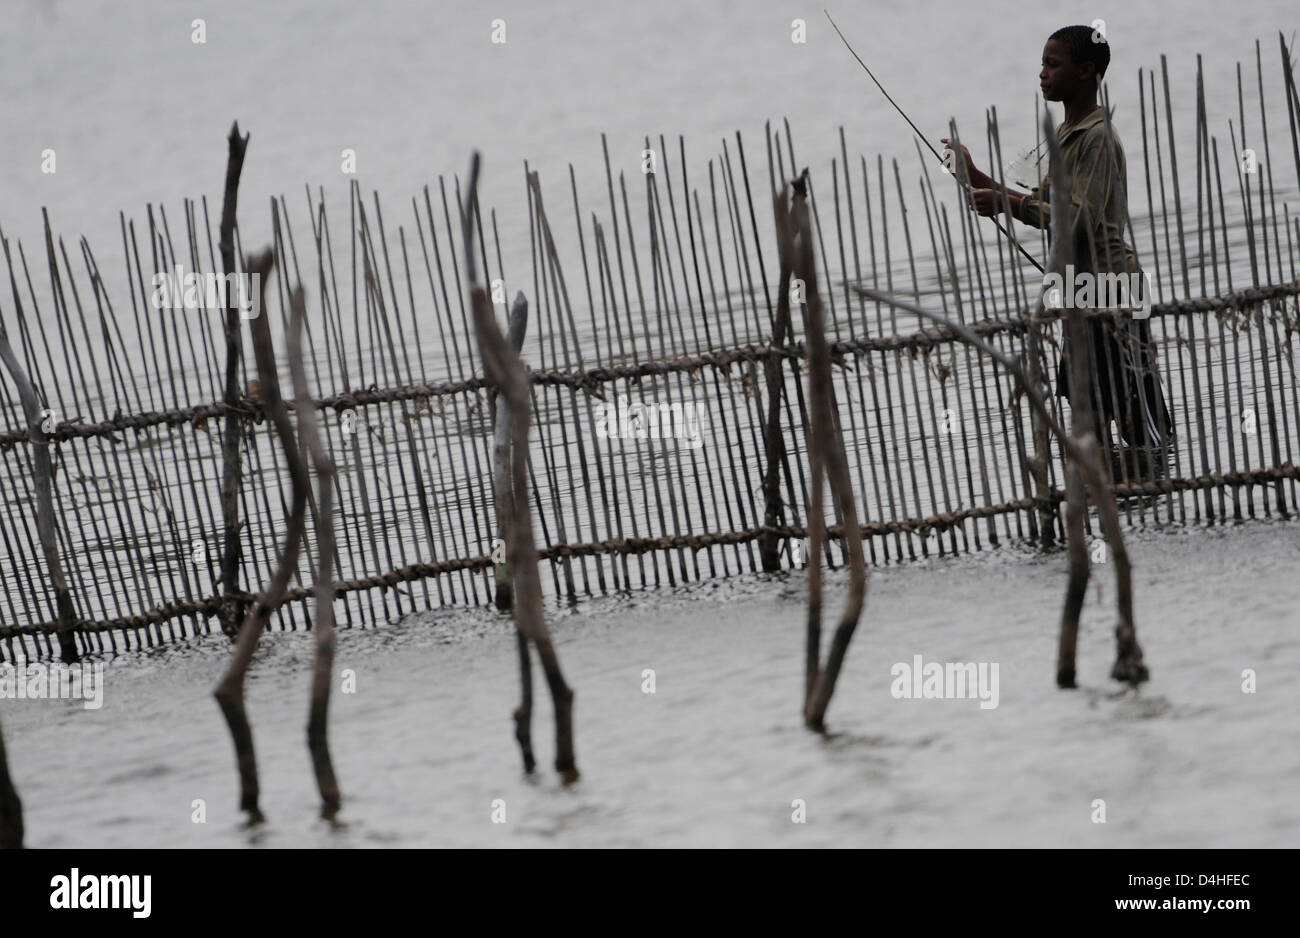 A young fisherman with a primitive fishing rod stands on the Kosi